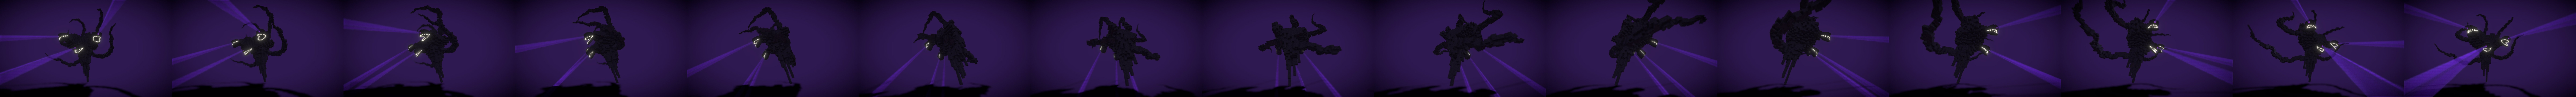 Playing Dead Wither Storm - 3D model by FireshinG (@FireshinG) [2909a21]